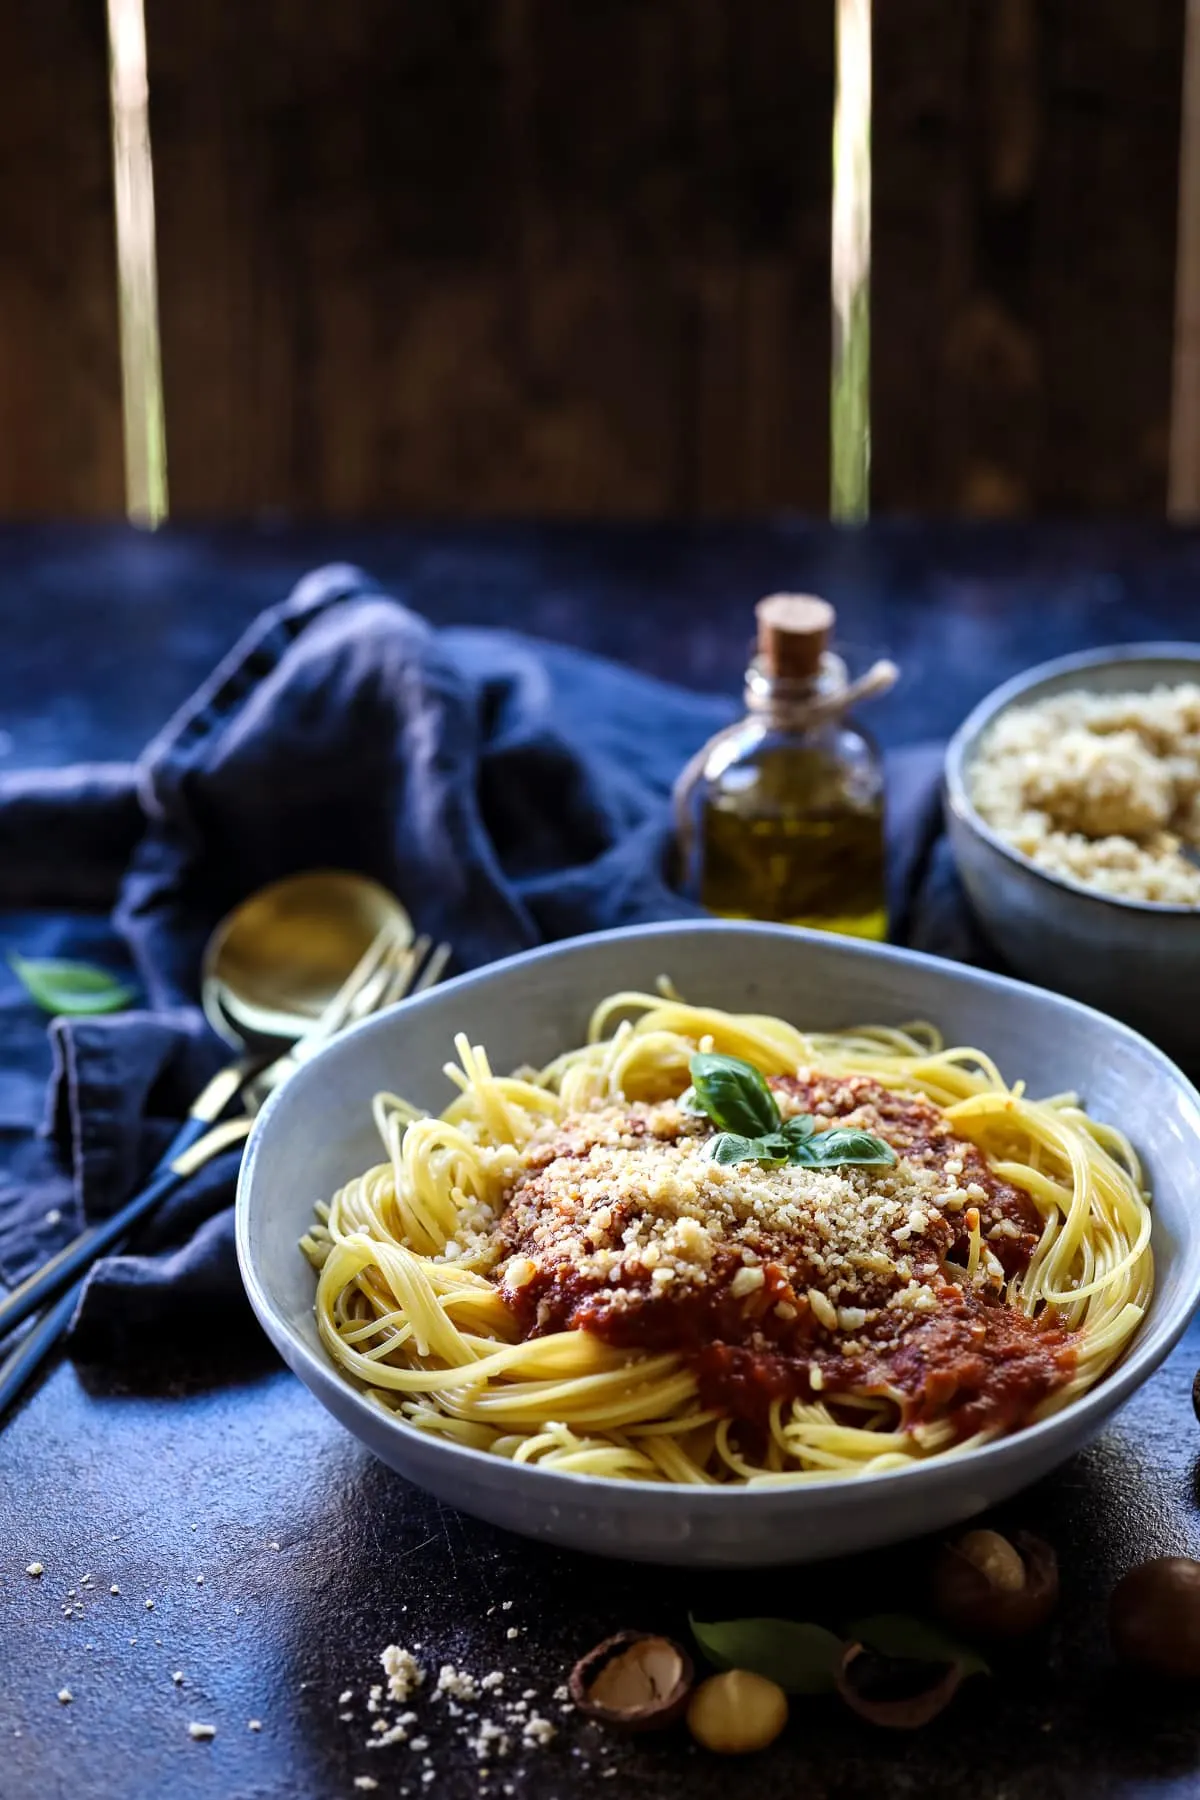 Spaghetti with Tomato Sauce and Vegan Parmesan Next to a Bottle of Olive Oil.